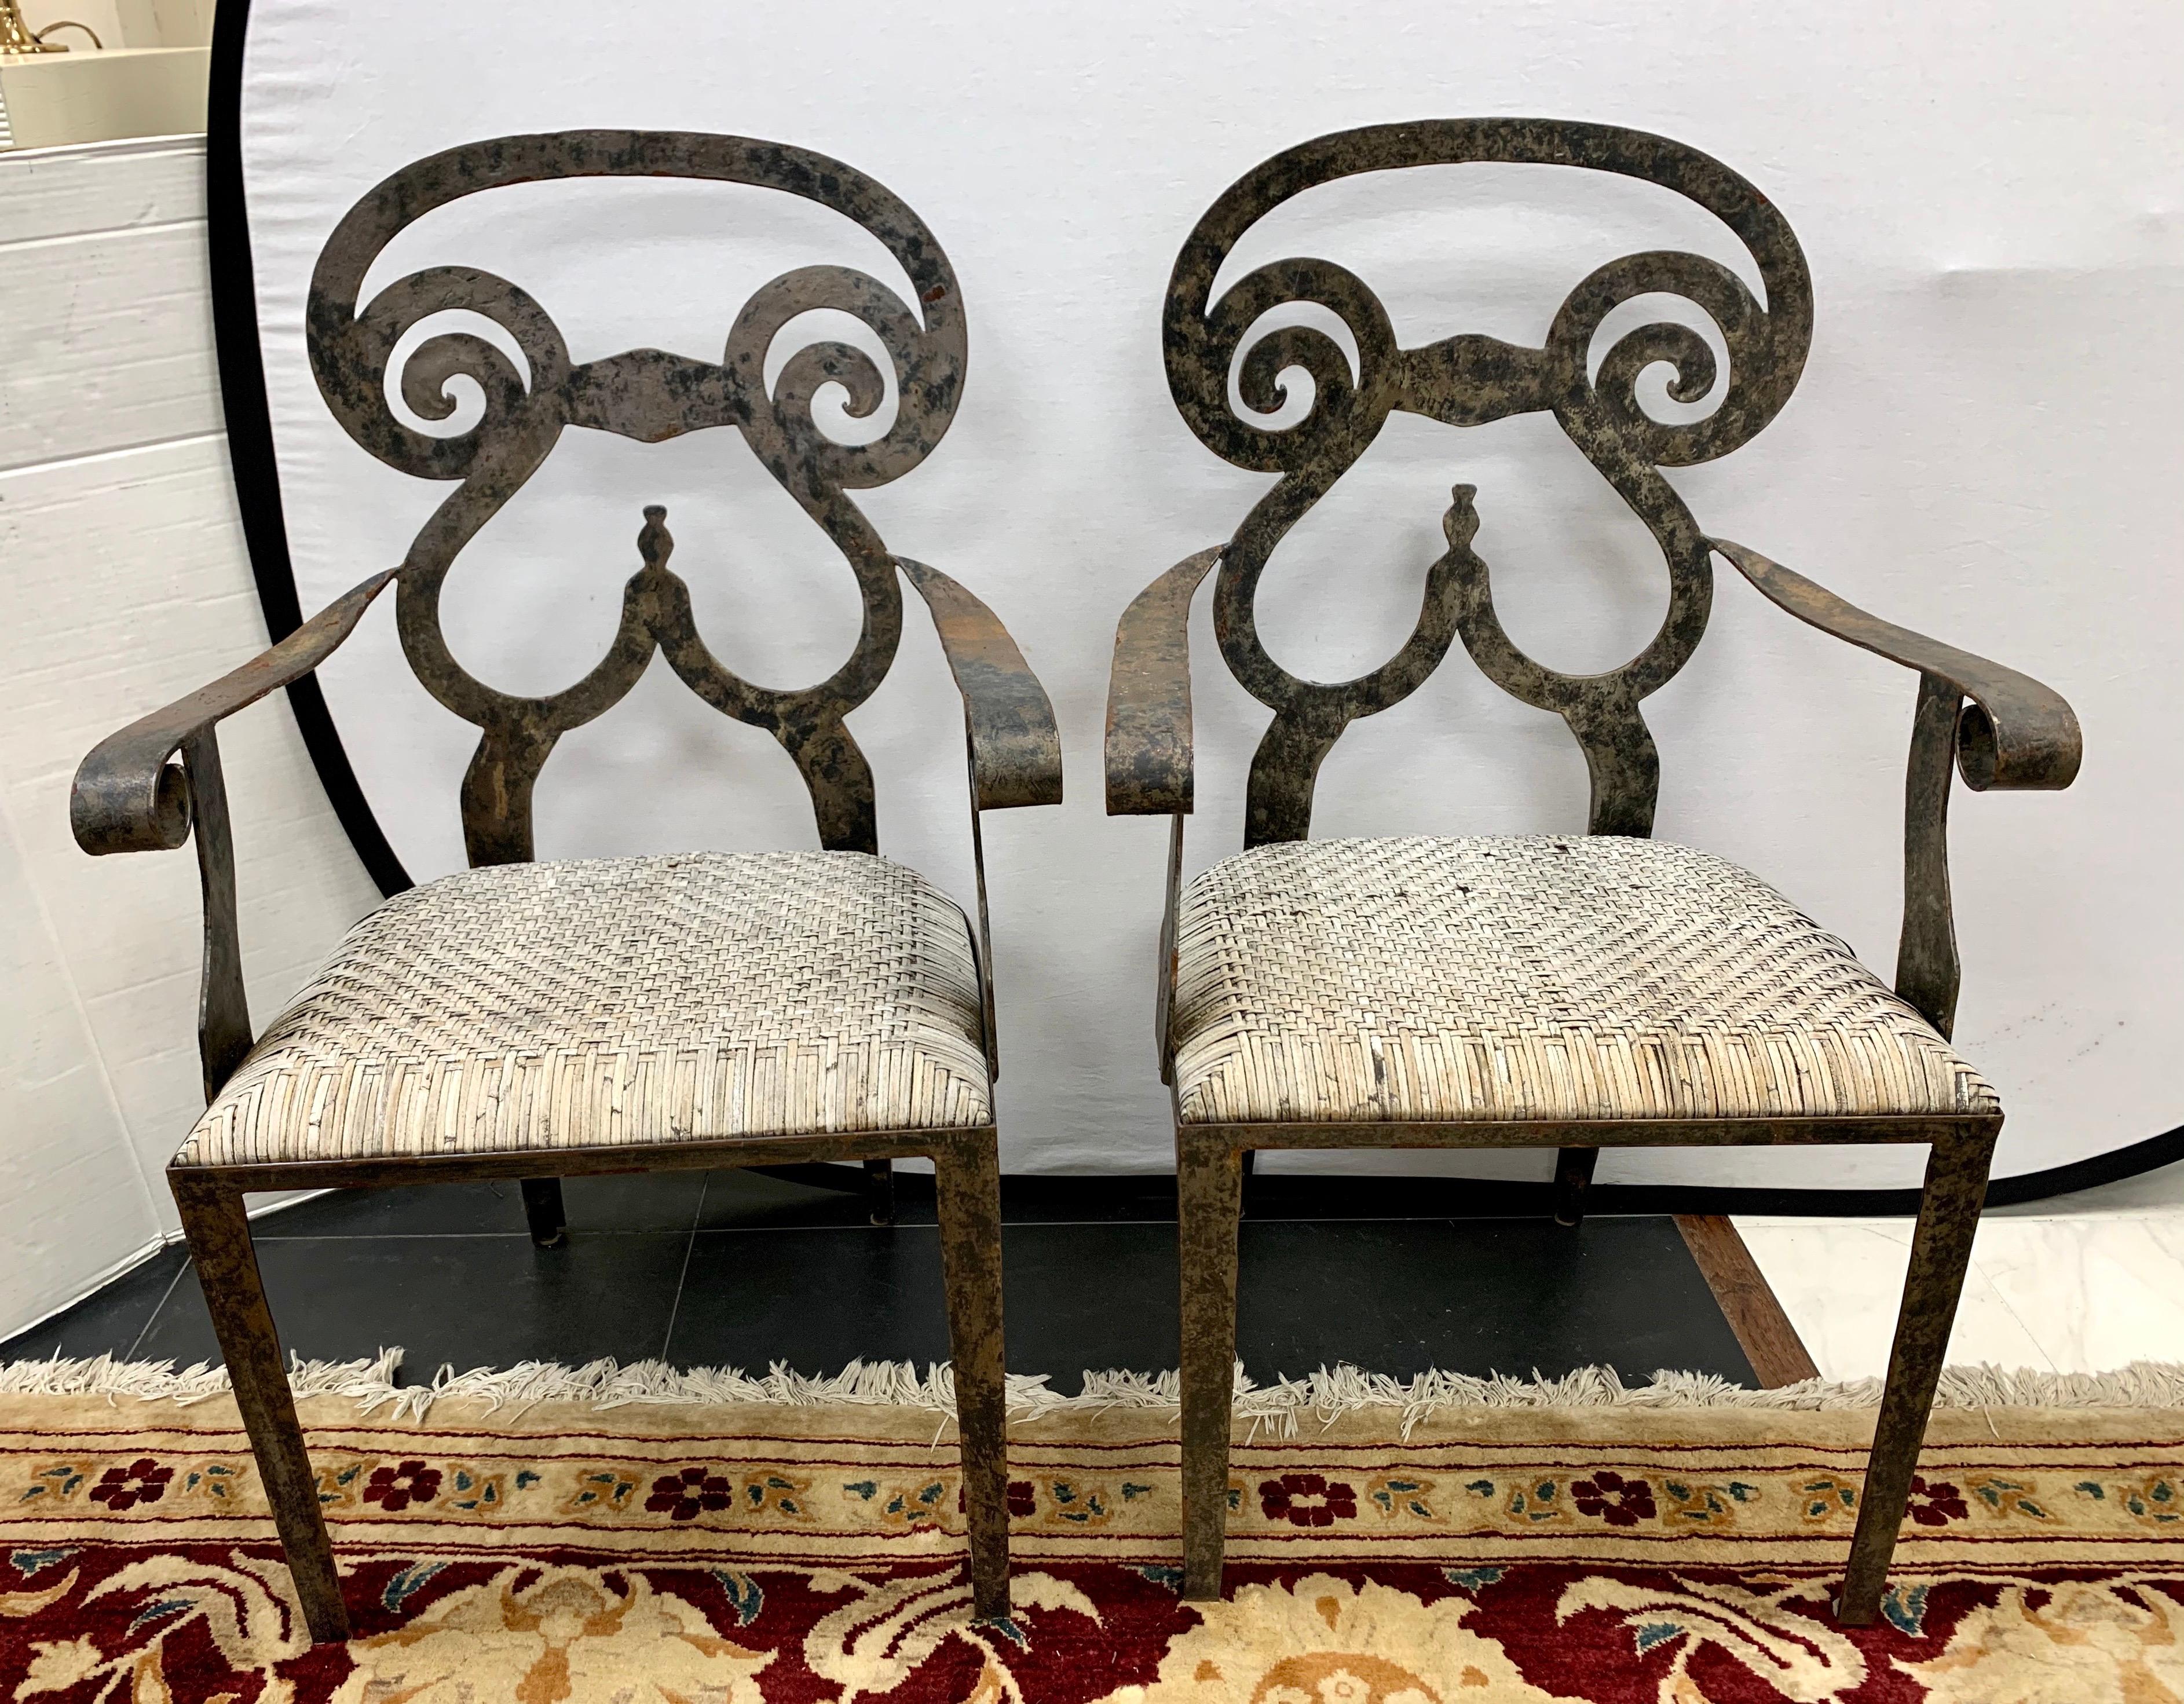 Set of 4 artisan cast iron patio chairs, 2 sides and 2 armchairs. Features round sculptural backs and woven rattan seats.
Measures: Side chairs 36” H x 21”D x 19” W
Armchairs 36” H x 21” D x 22” W.